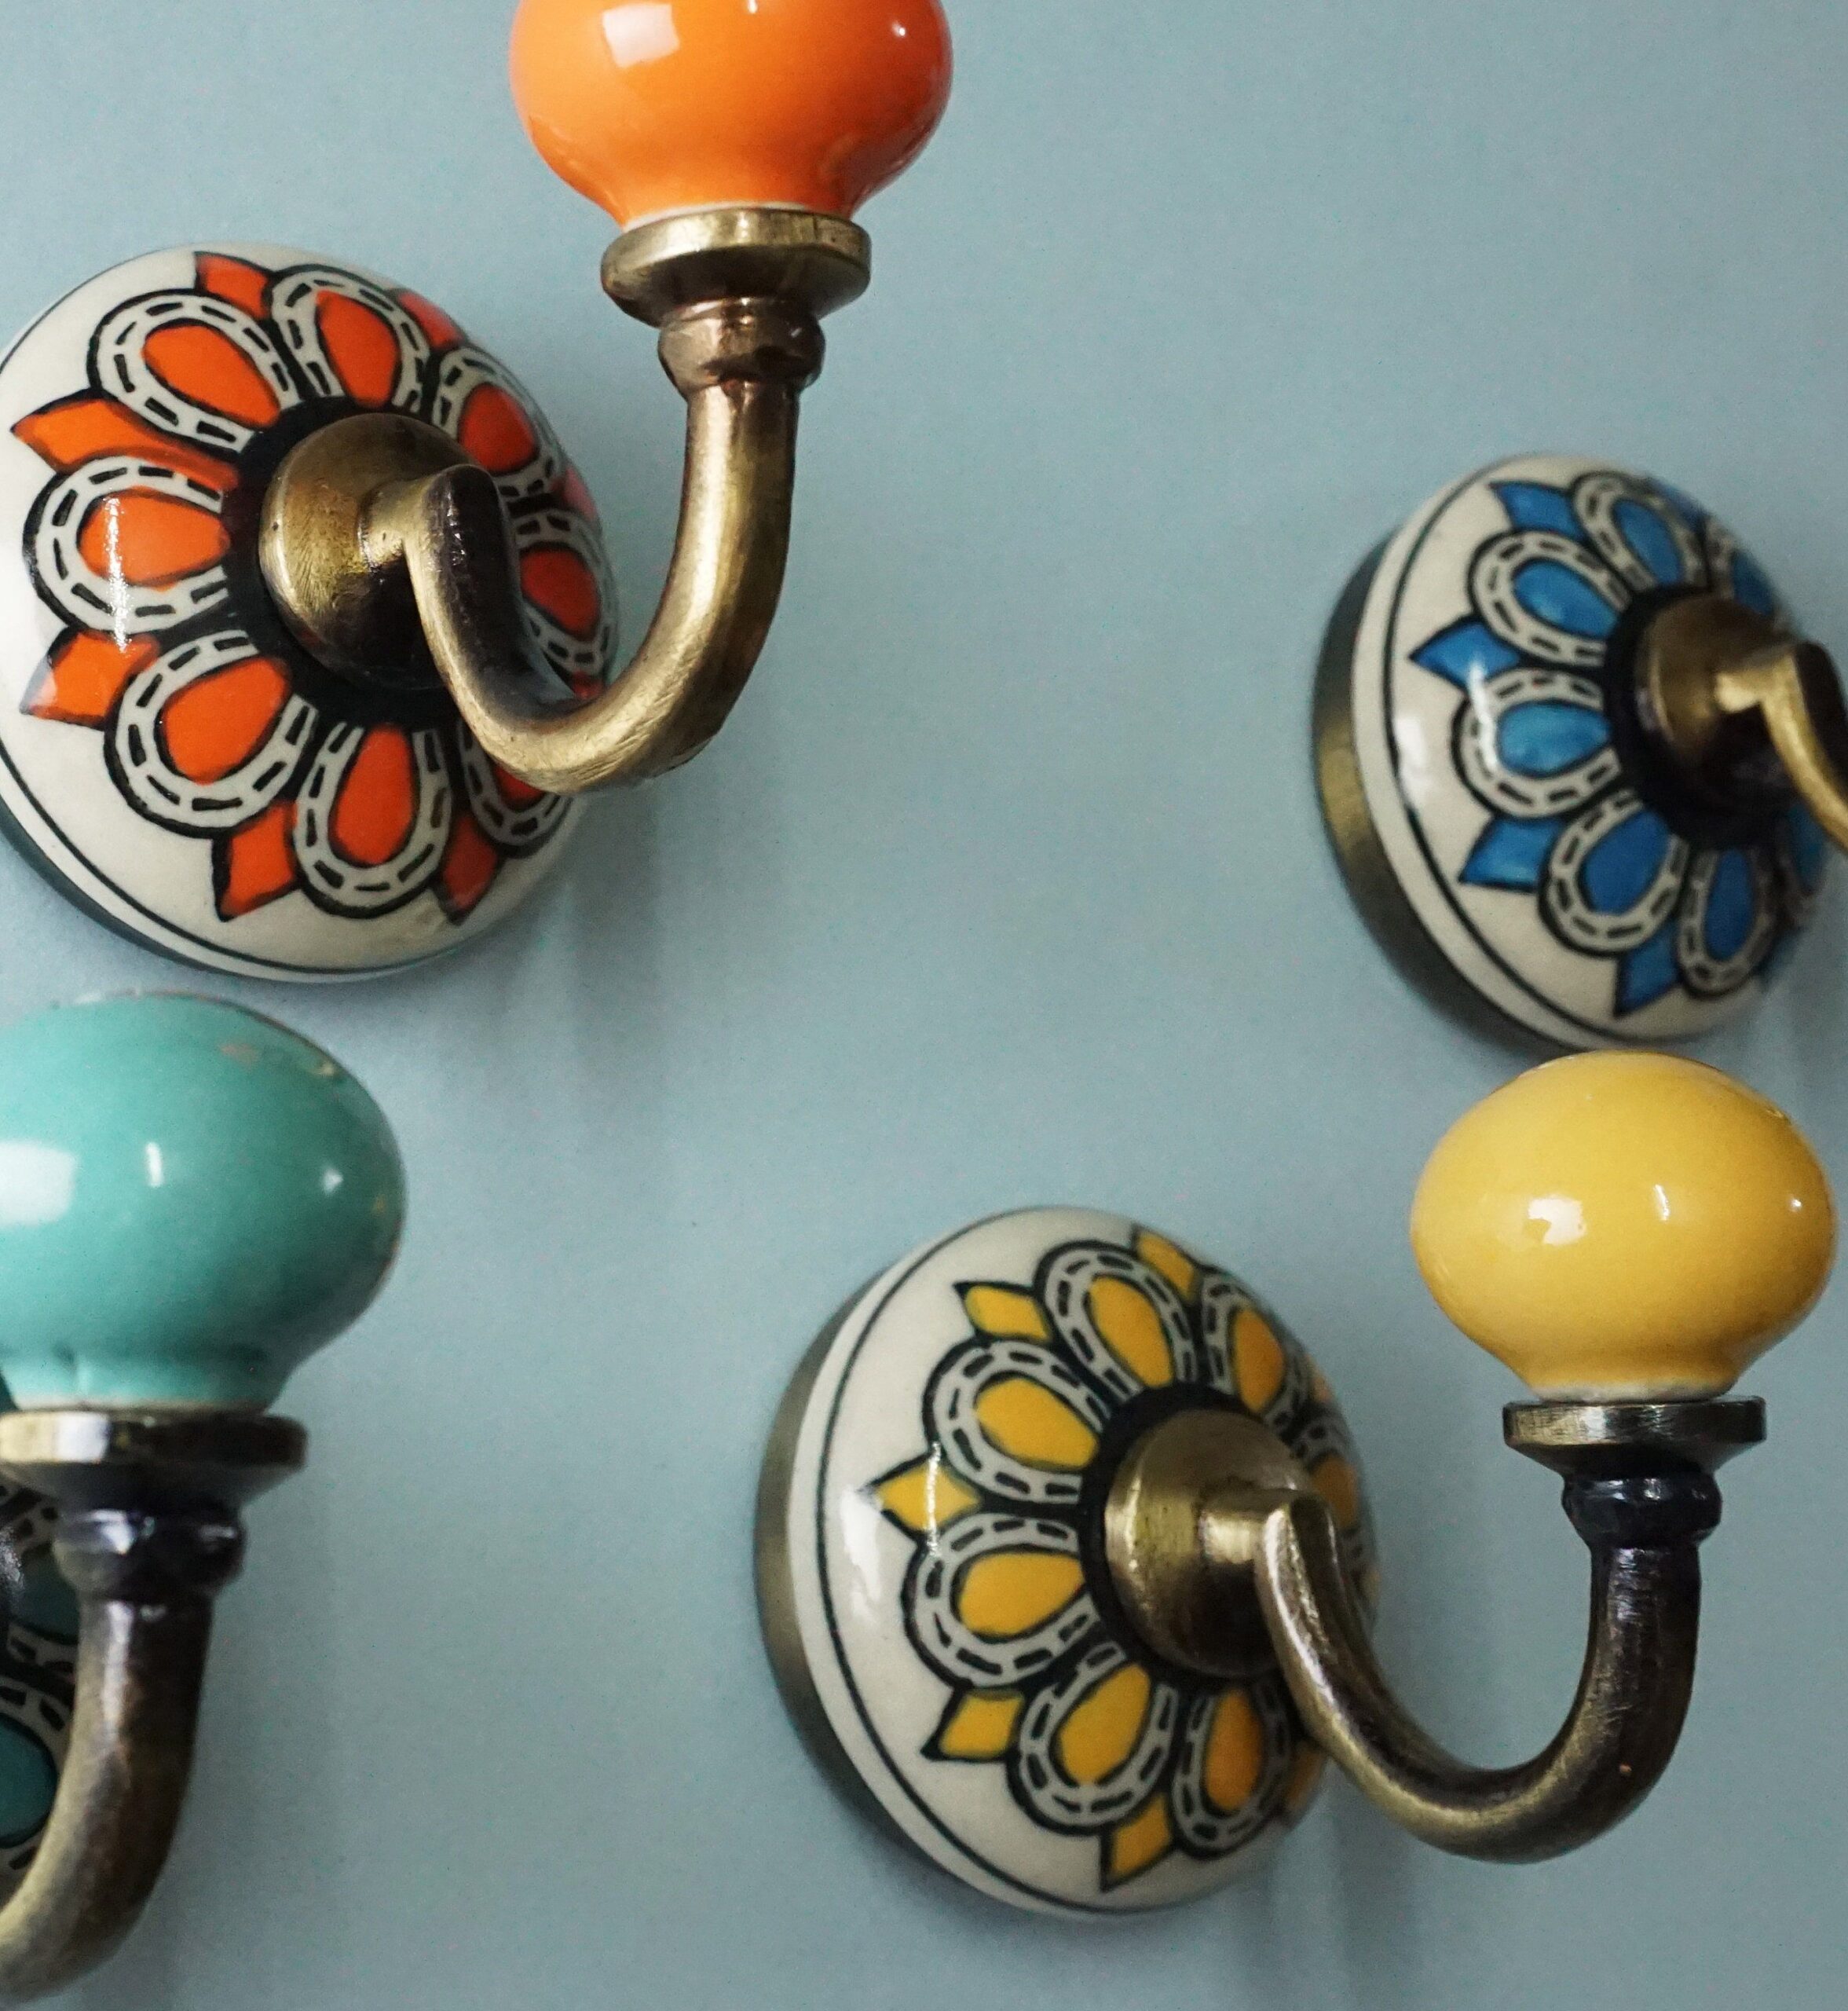 Decorative Wall Hooks Add Flair to Your Walls with These Stylish Wall Hook Options